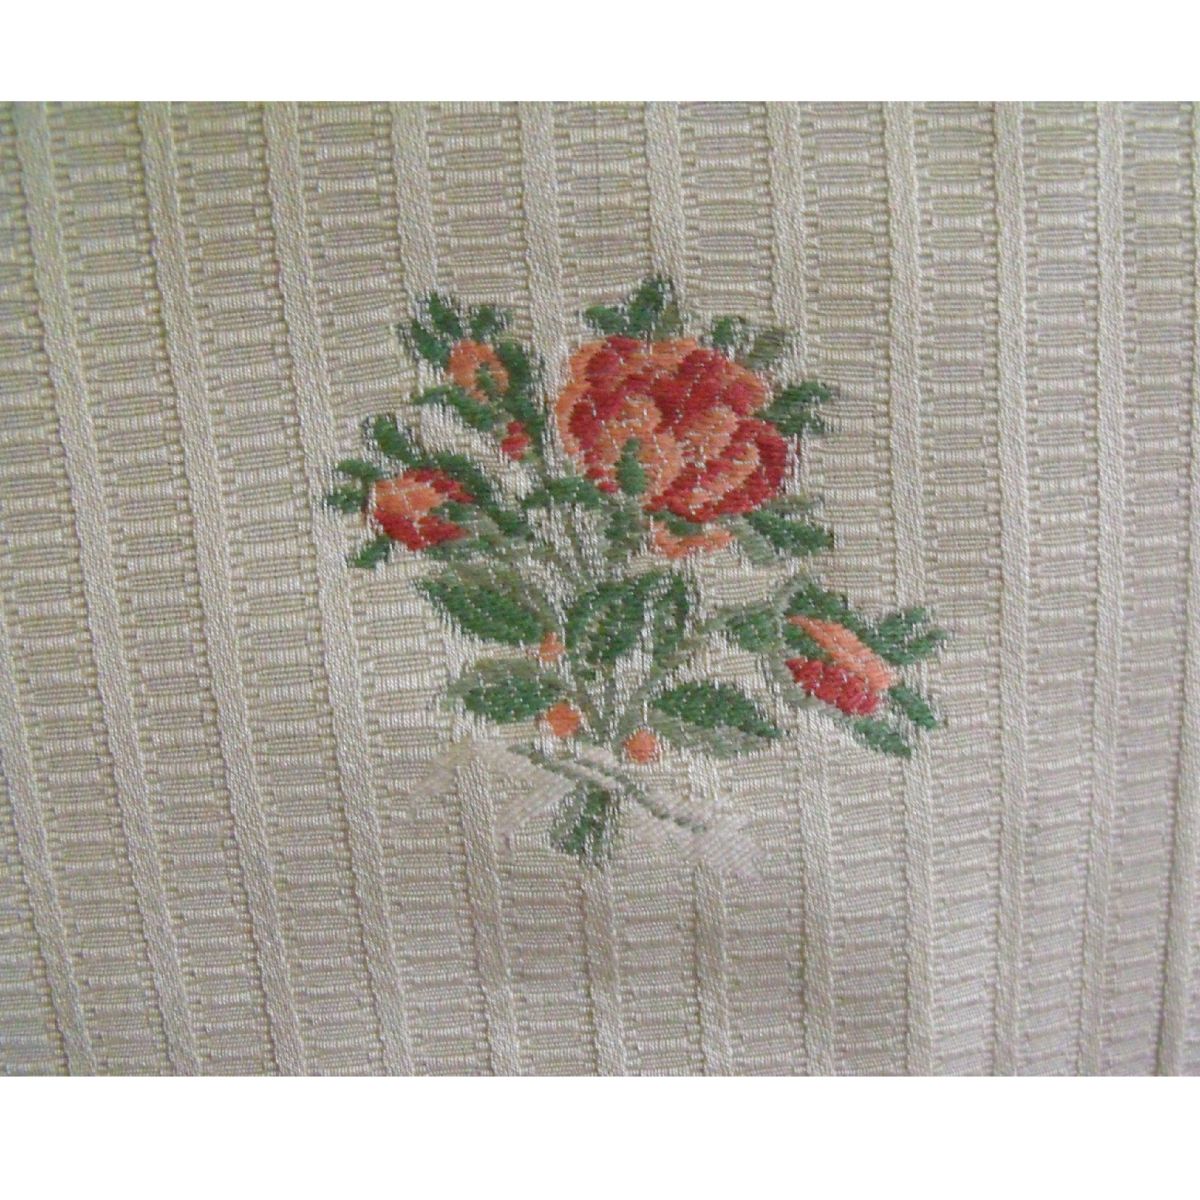 SOLD Nosegay Weave Peach Ivory Floral Embroidery Lee Jofa